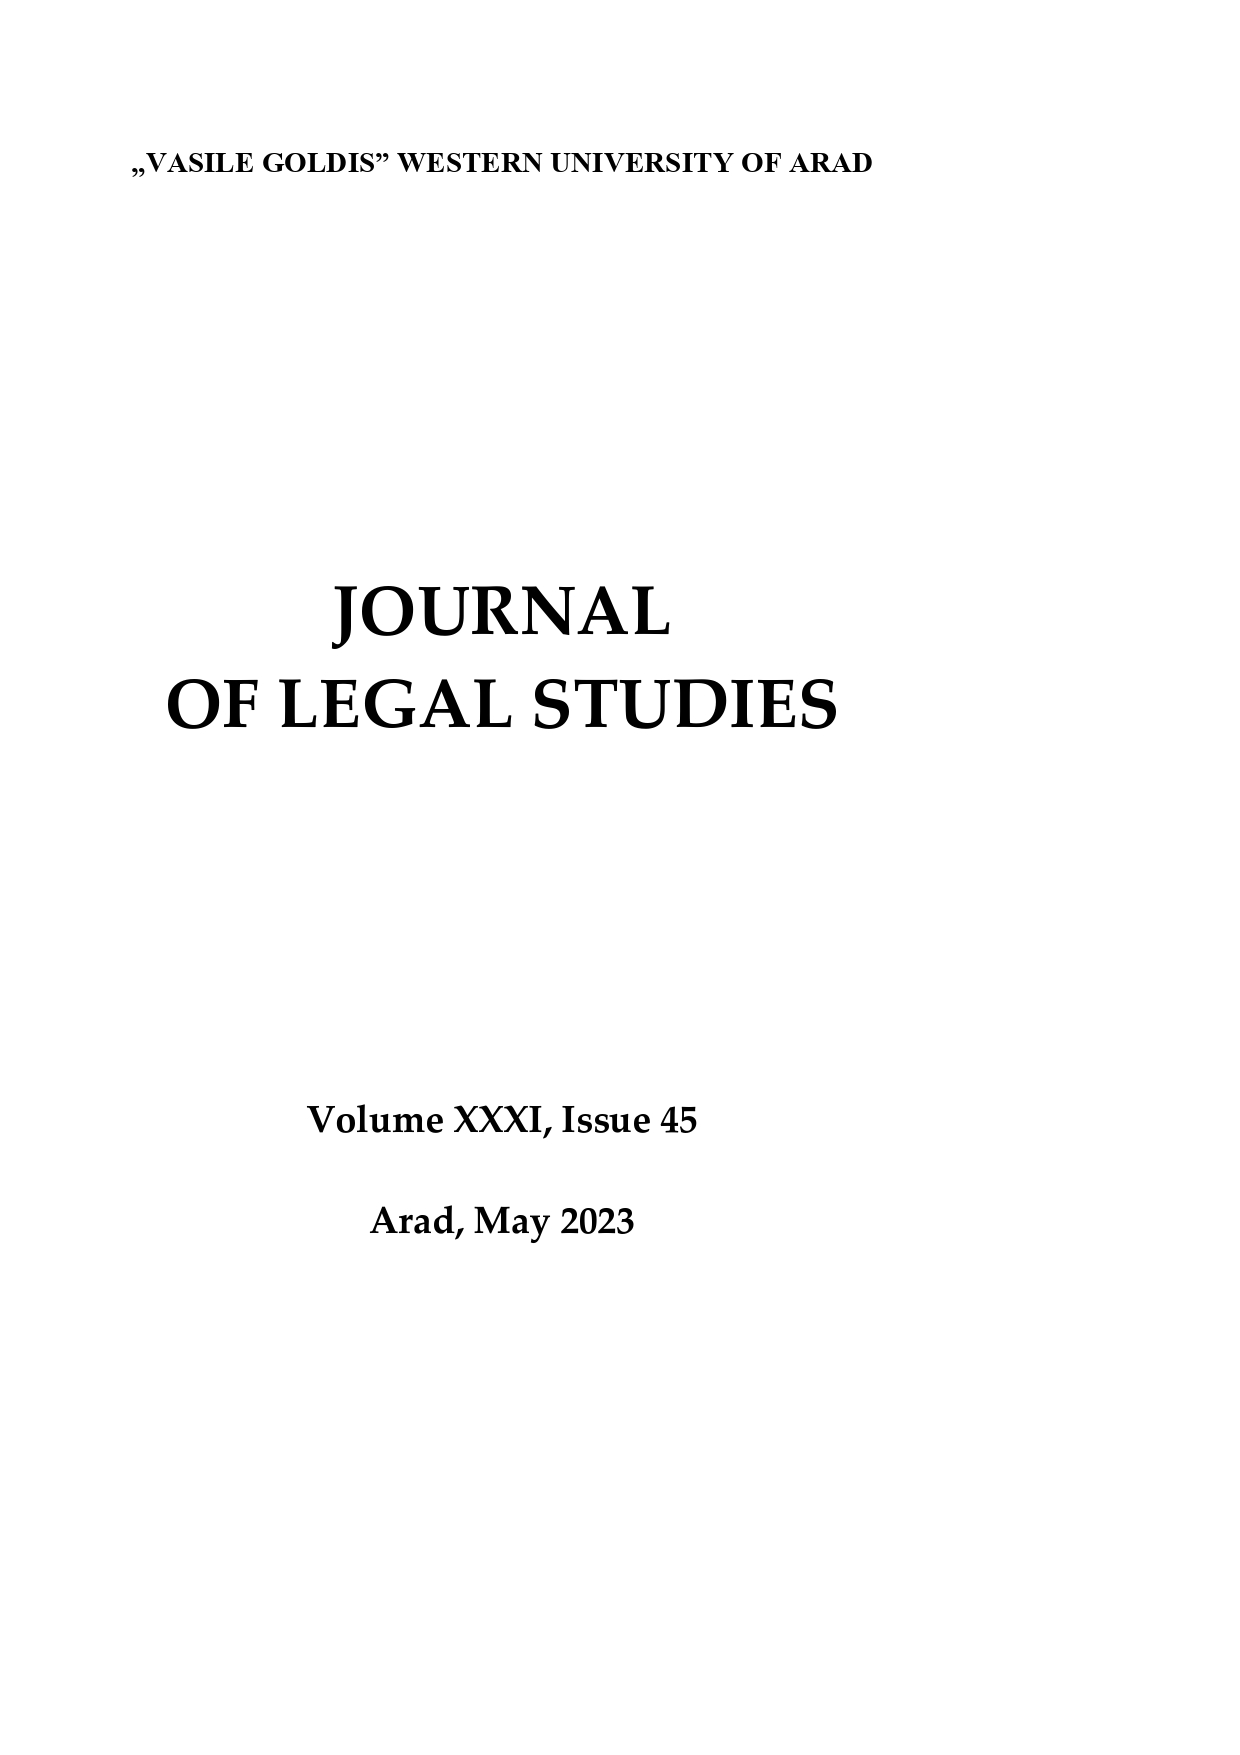 COMPARATIVE STUDY OF EXCEPTIONS TO IMAGE RIGHTS WITH EMPHASIS ON THE IRANIAN LEGAL SYSTEM